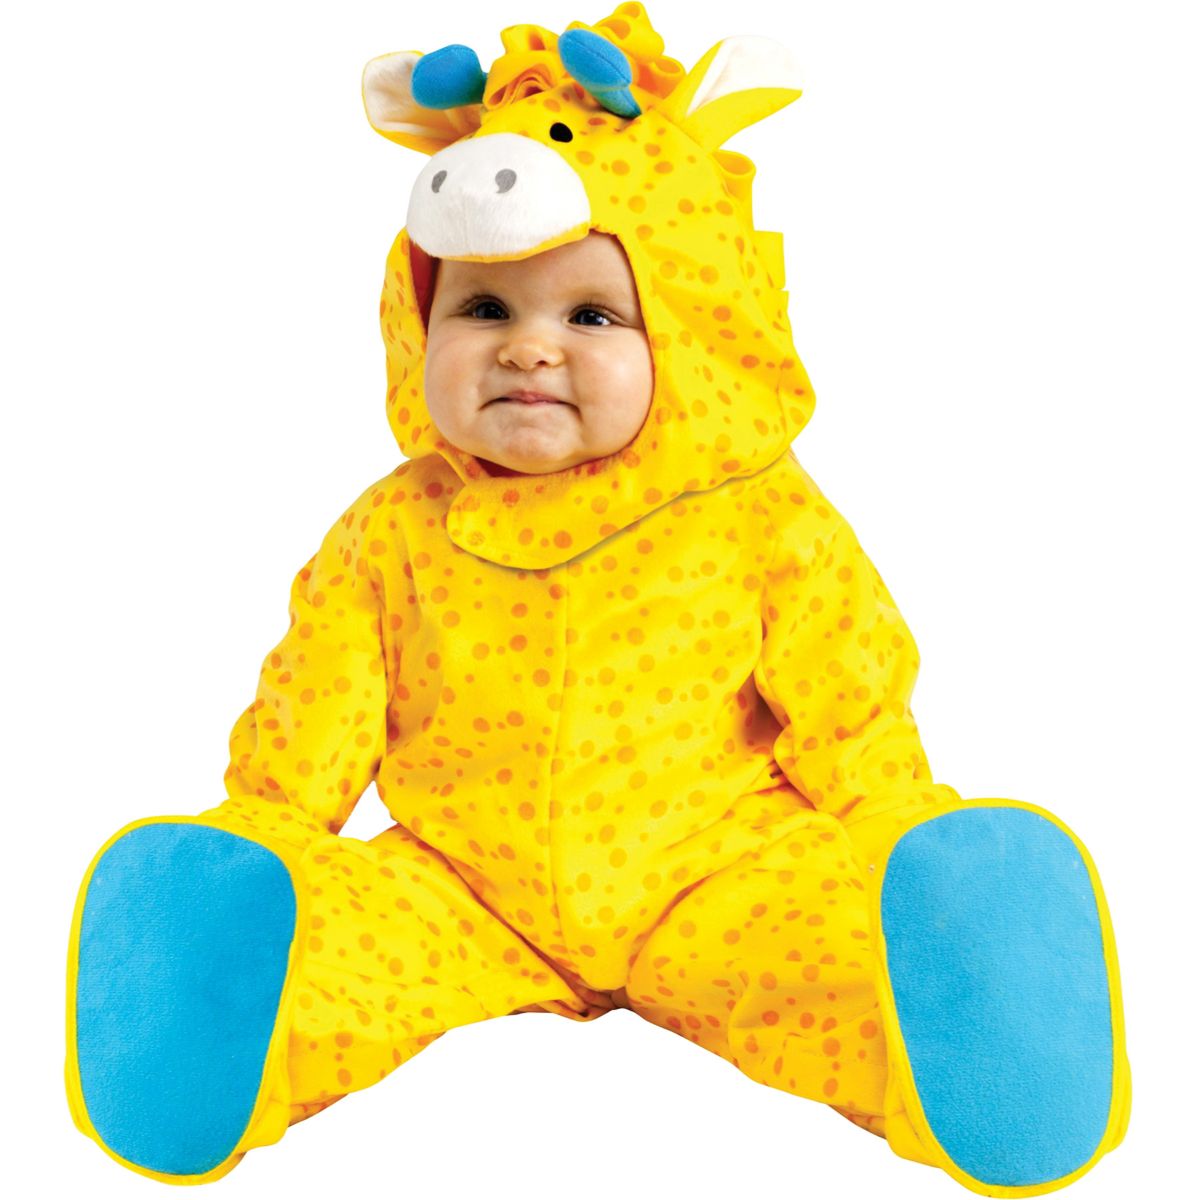 The Costume Center Blue and Yellow Giraffe Infant Halloween Costume - Small